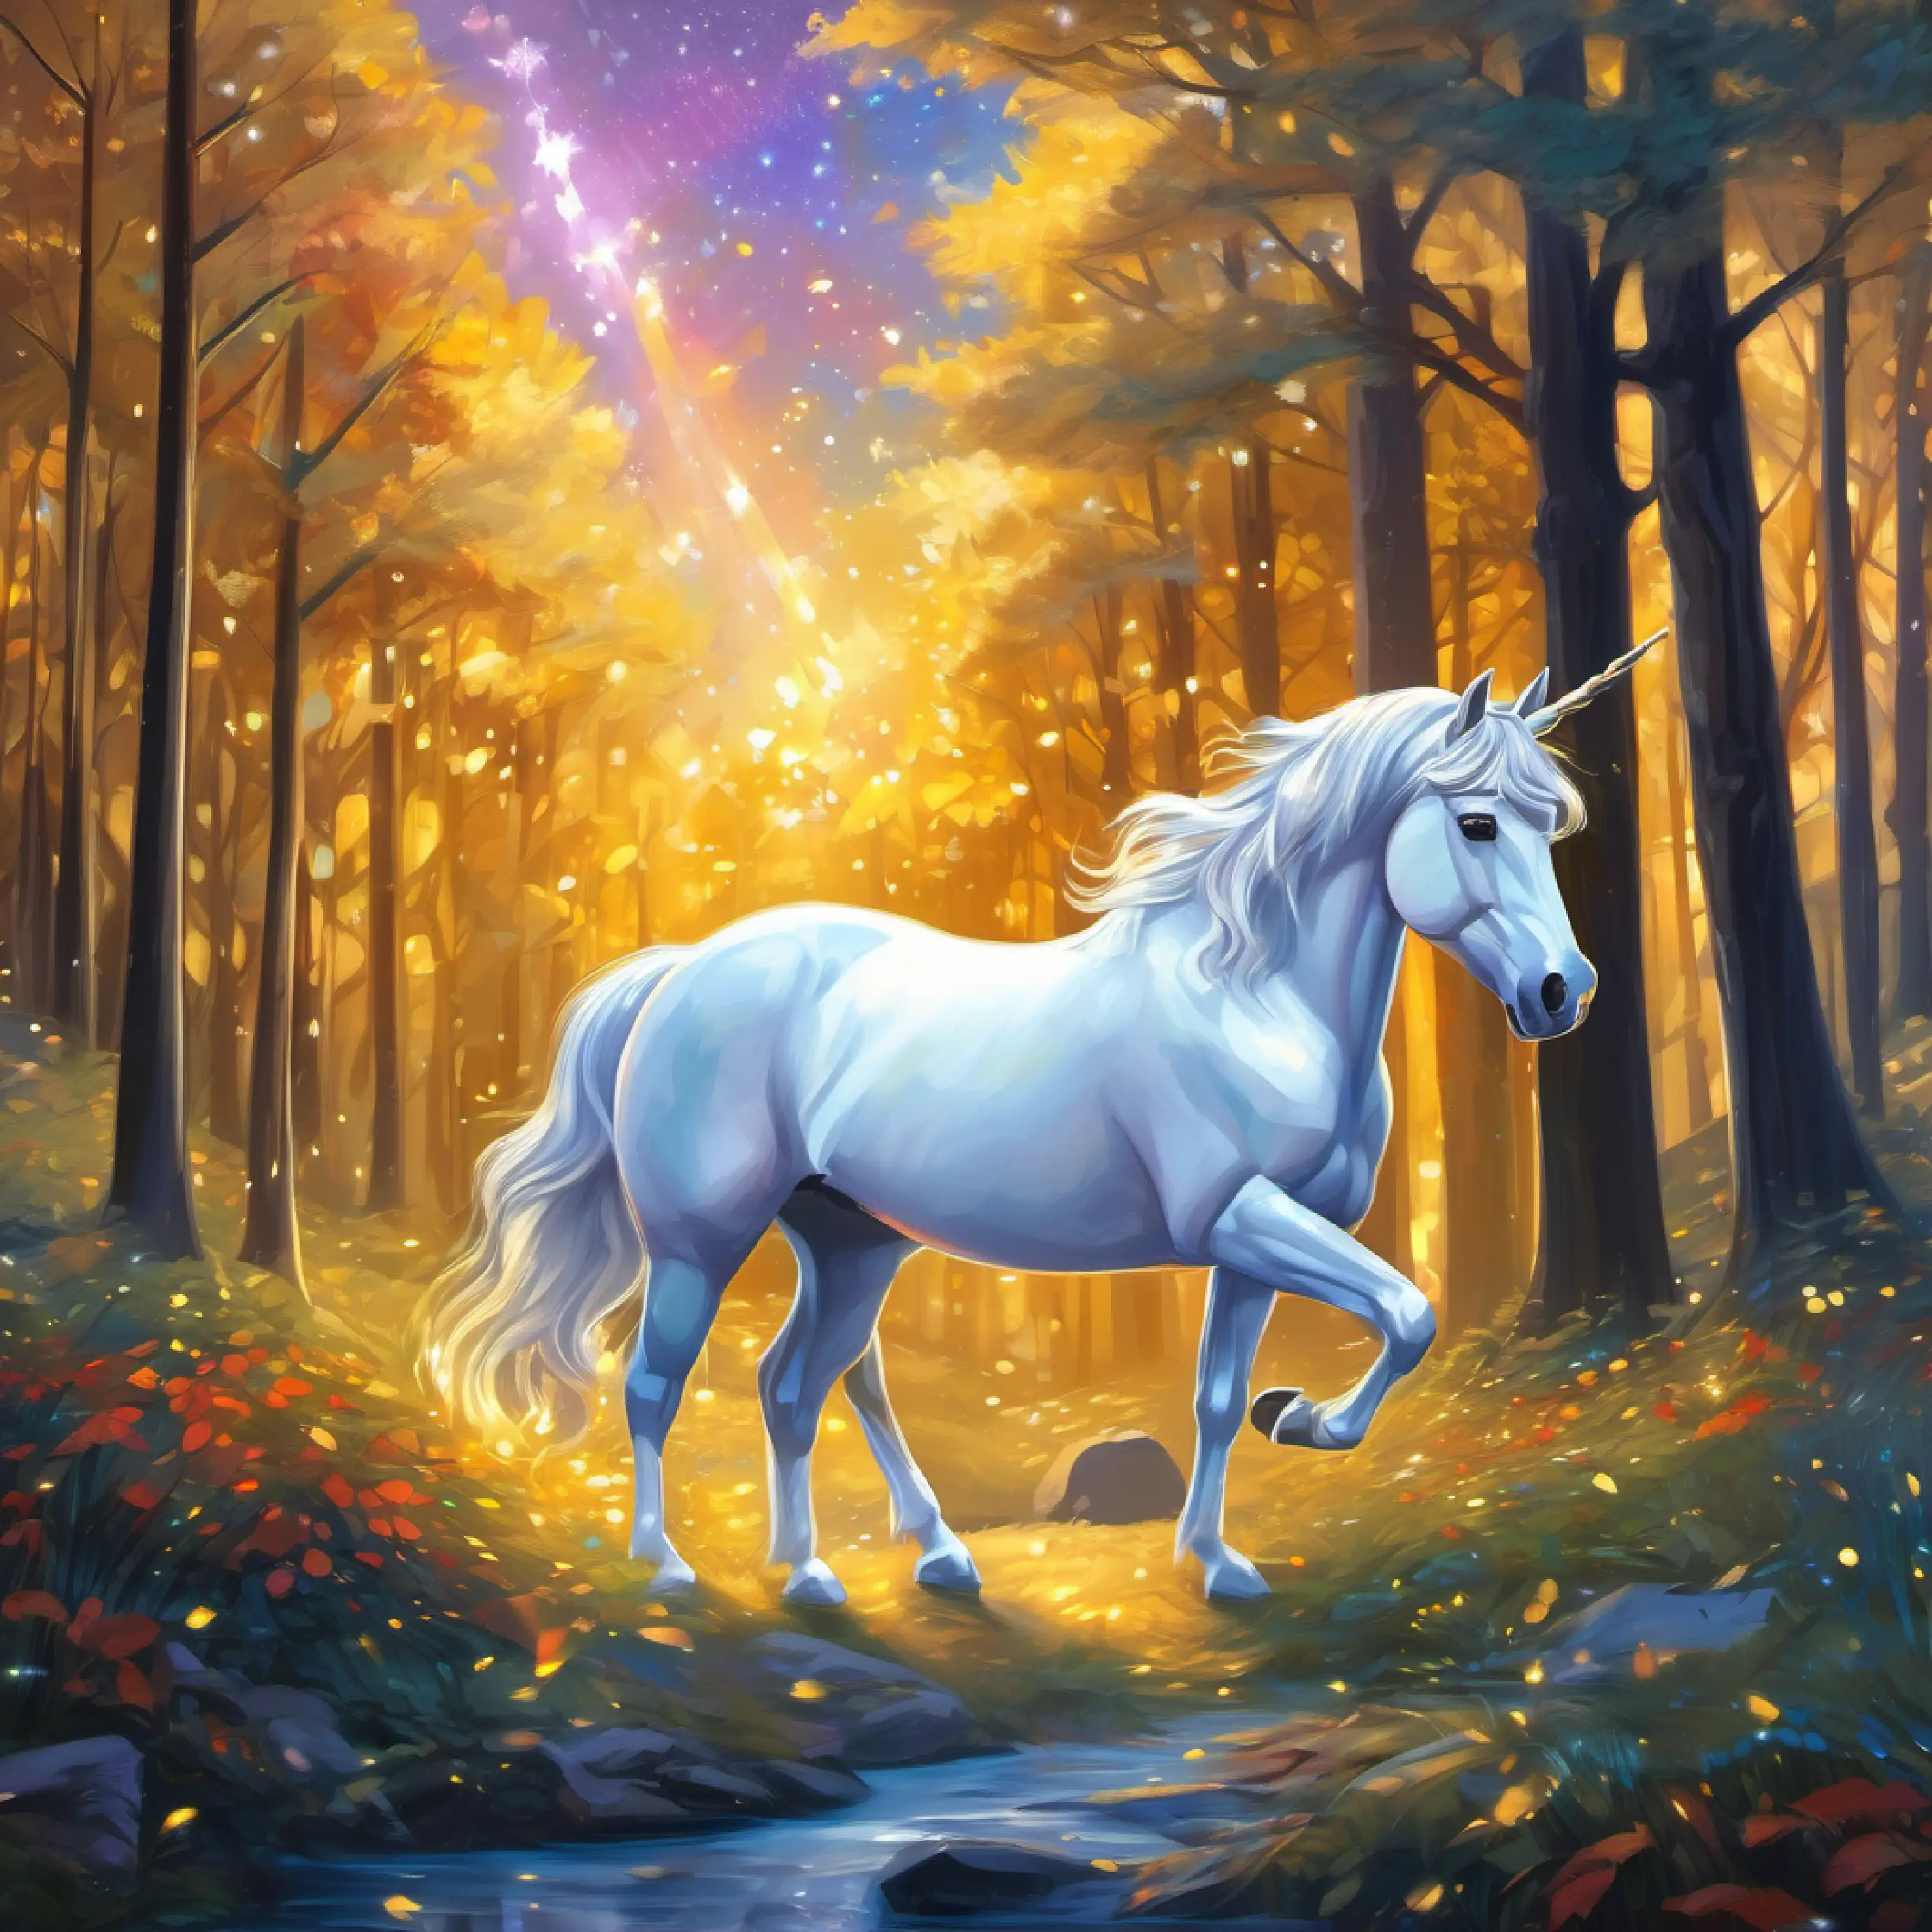 Young unicorn, golden hoof, stardust trail, eyes reflecting bravery's return as a hero, honored by all in the forest.